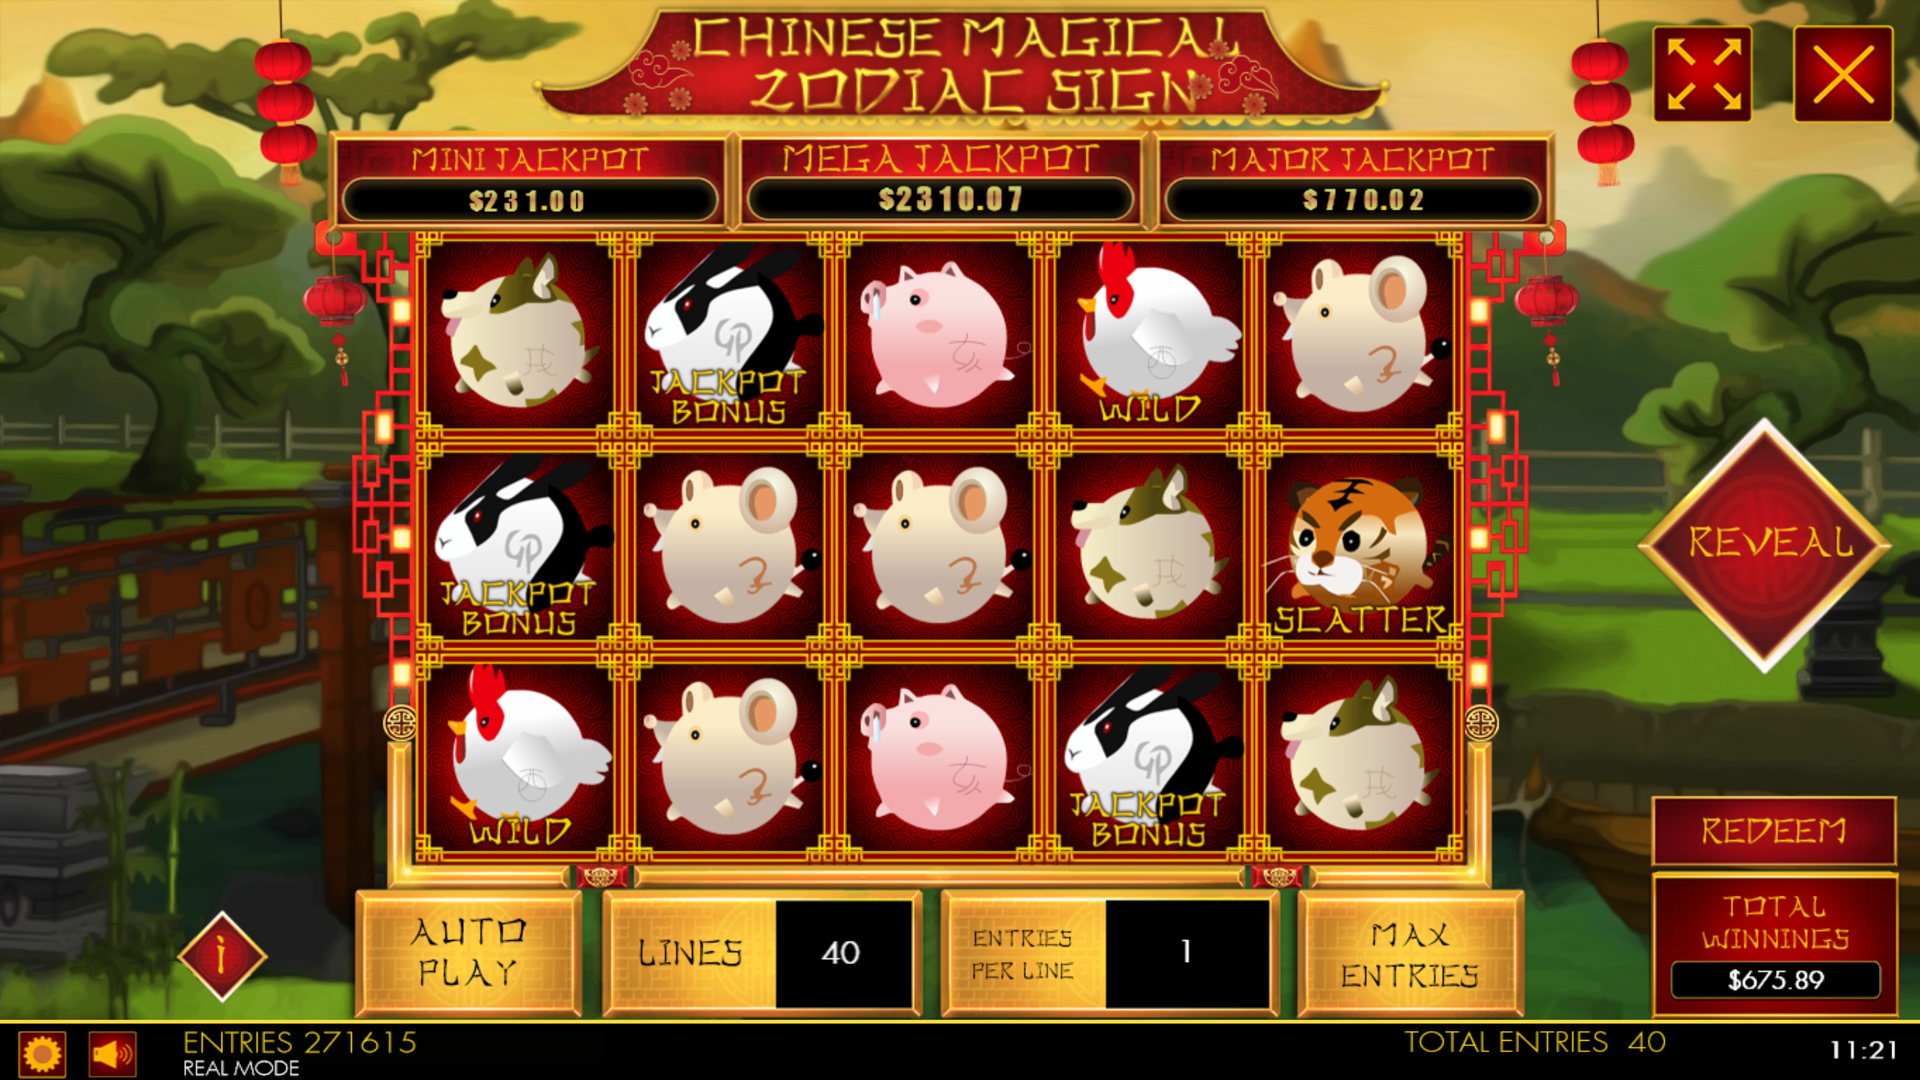 Chinese Magical Zodiac Sign Preview Pic Main Screen 1